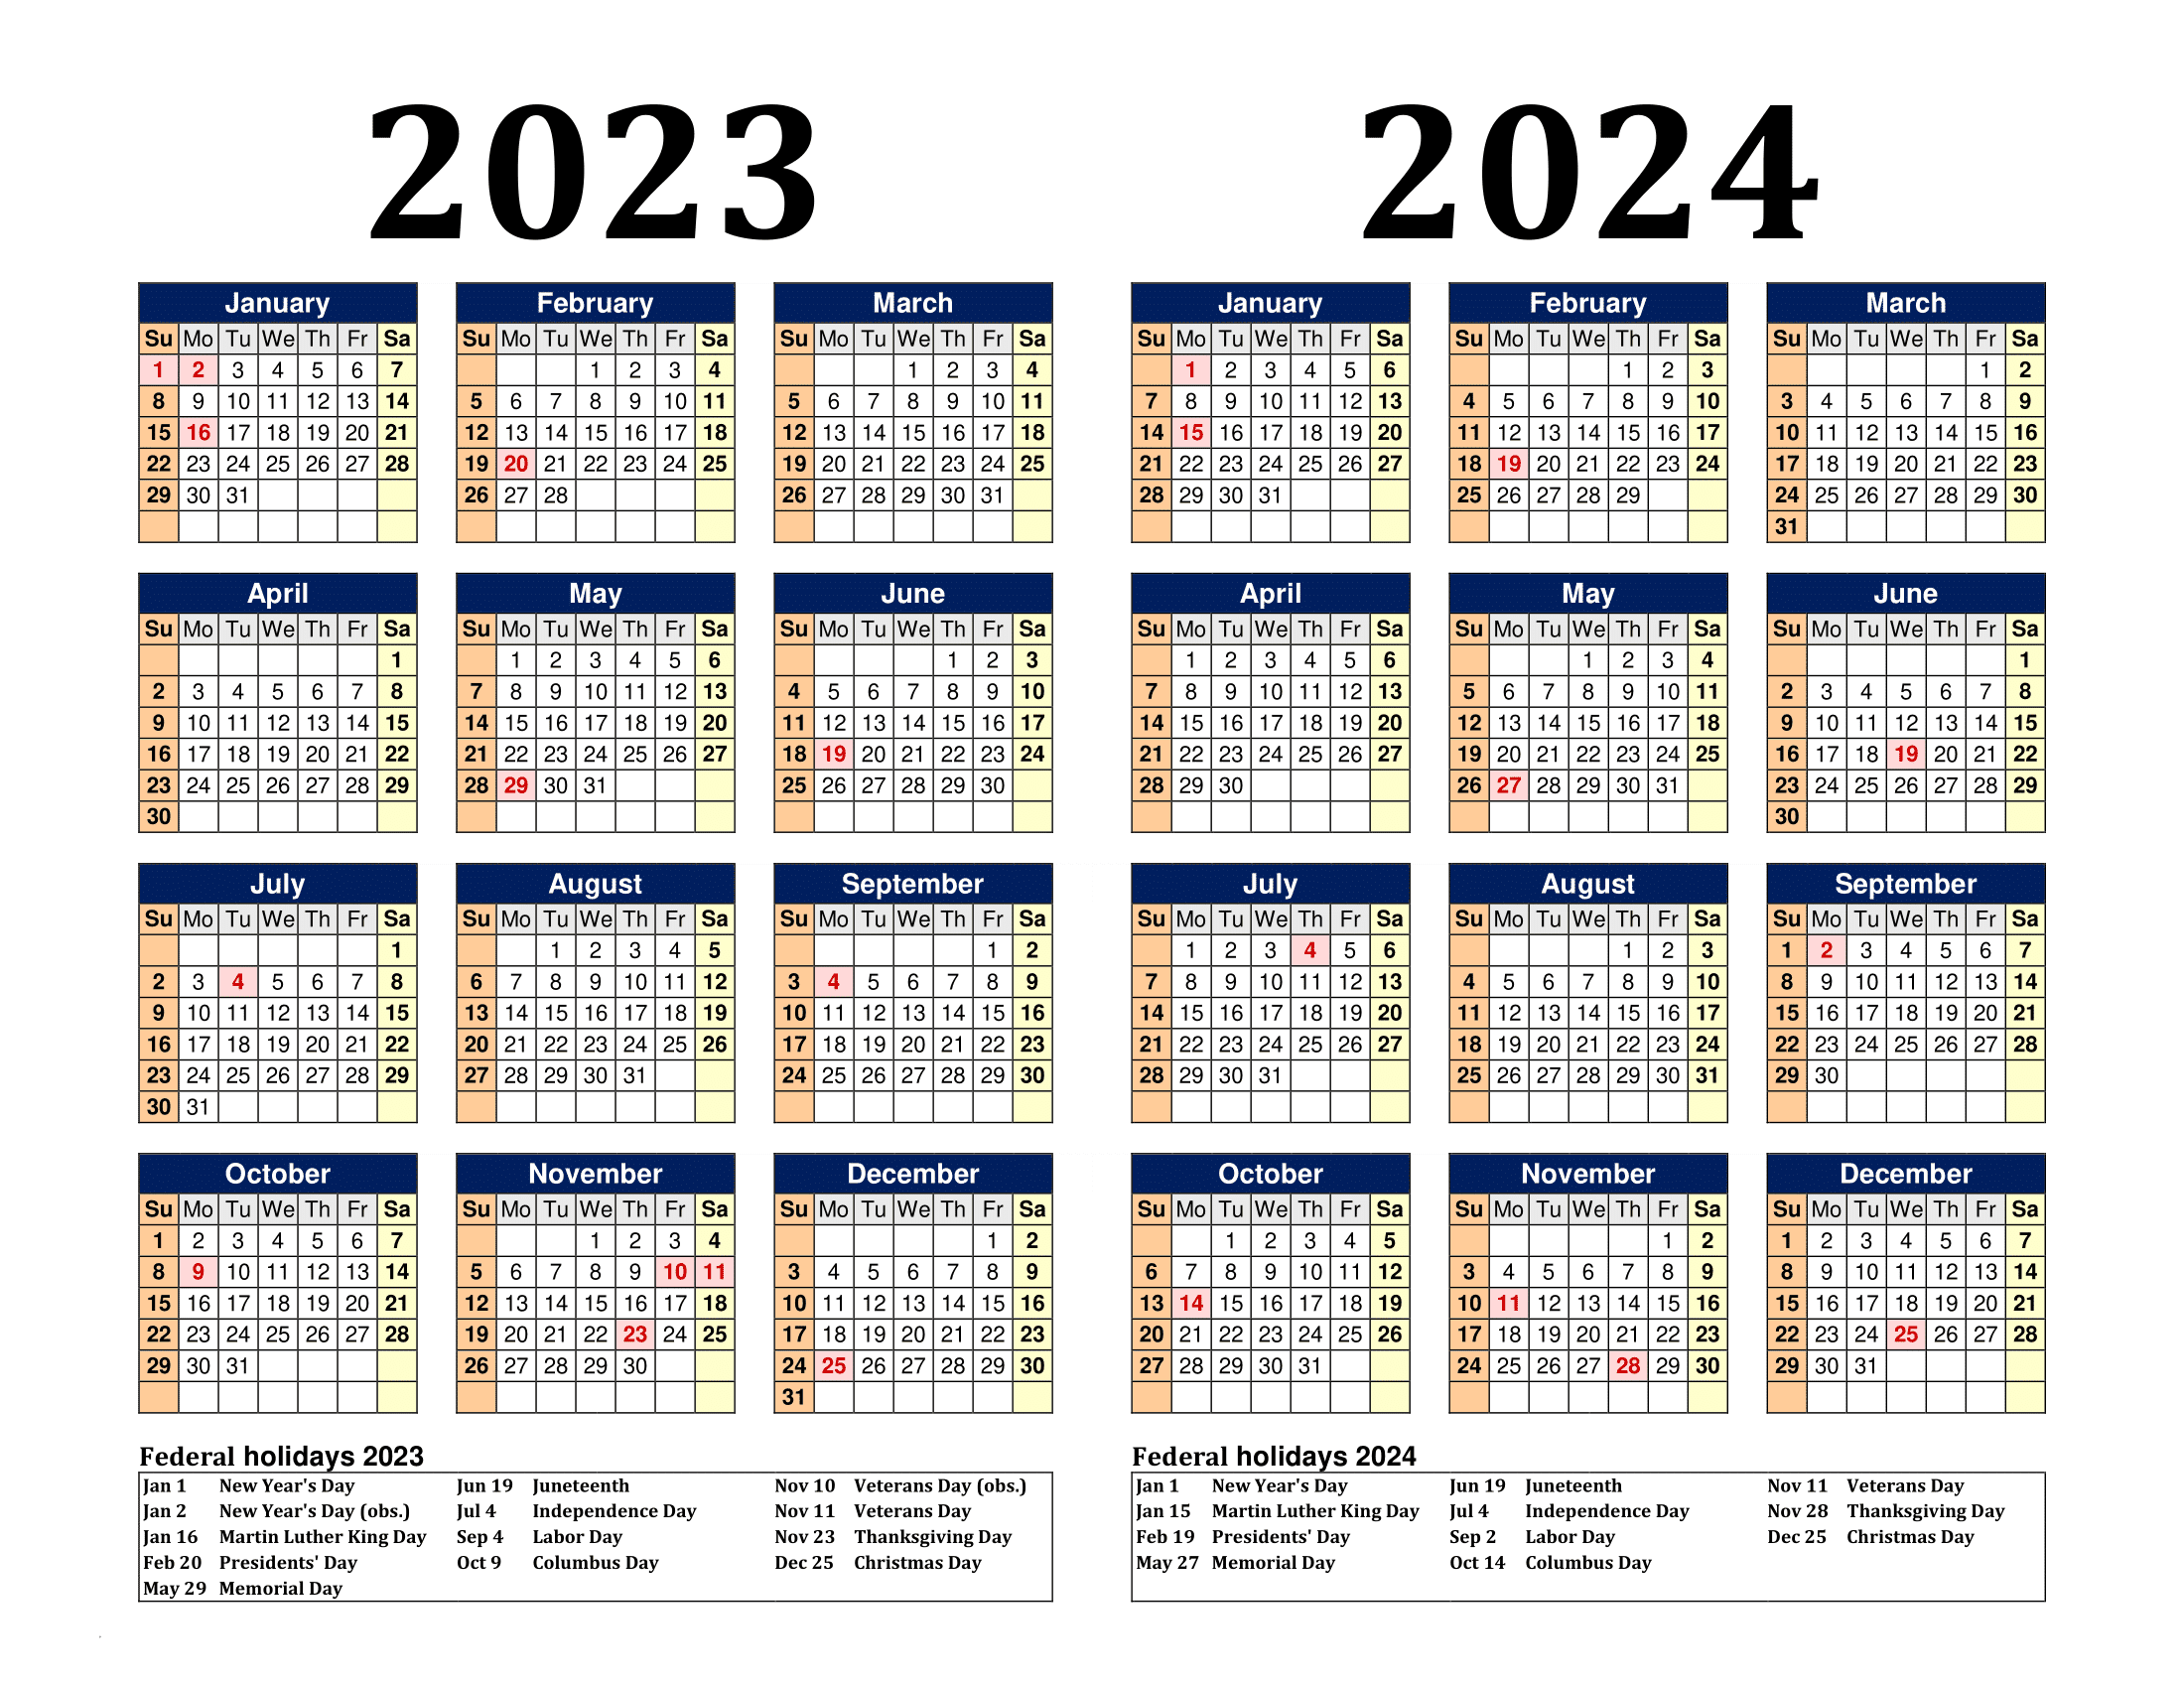 Free Printable Two Year Calendar Templates For 2023 And 2024 In Pdf pertaining to Free Printable Calendar 2024 2 Week